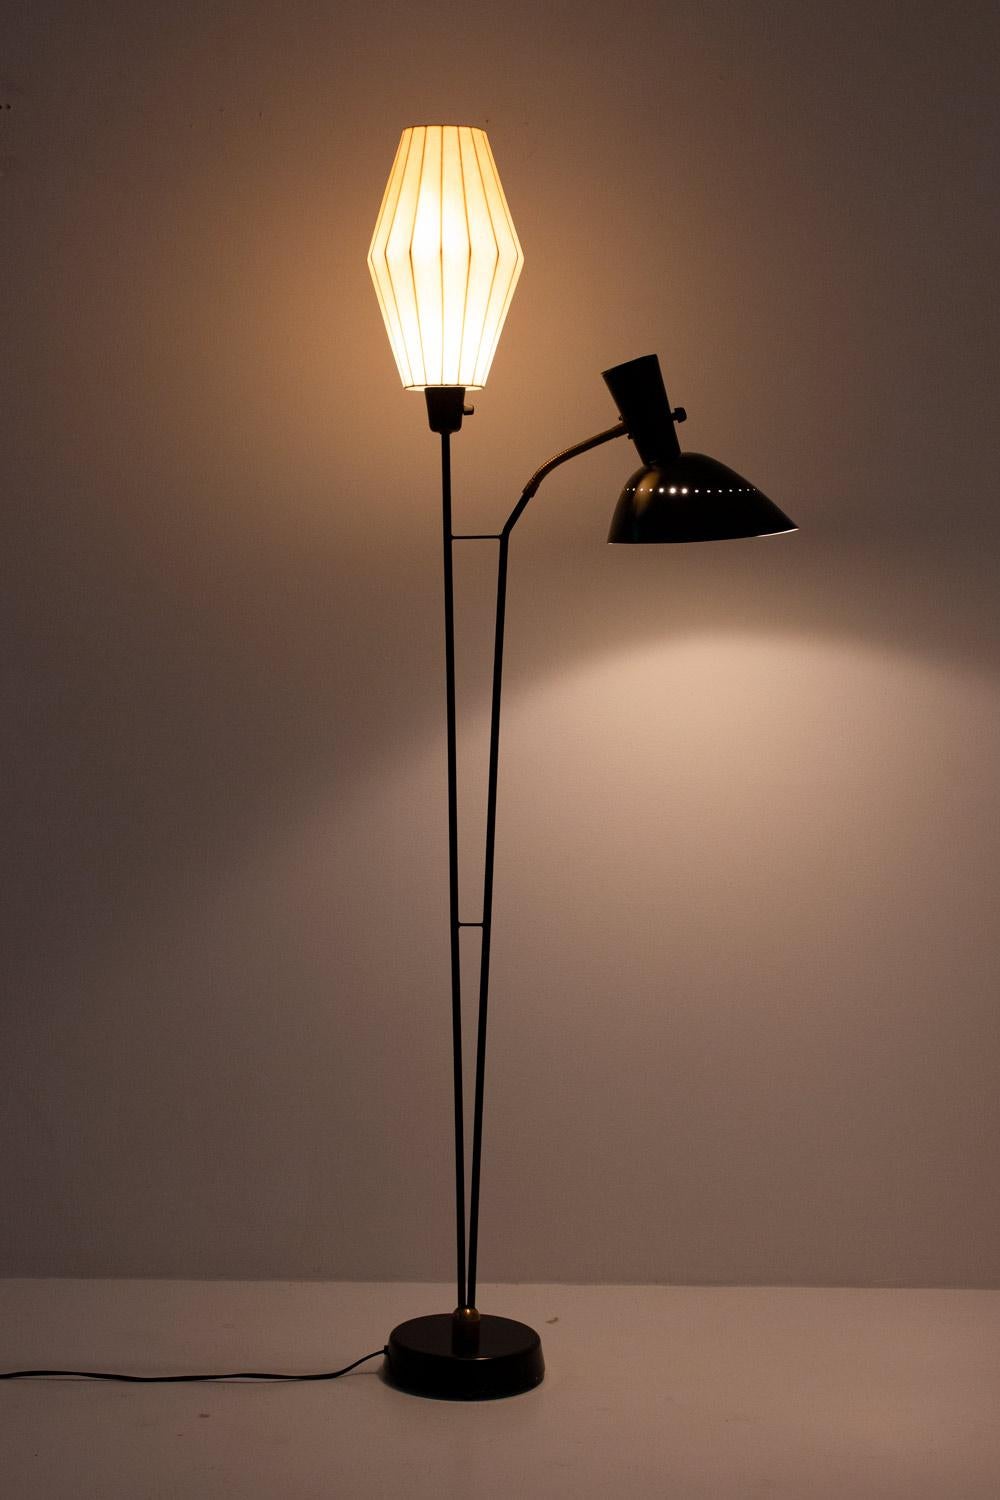 Beautiful floor lamp attributed to Hans Bergström for Swedish manufacturer Ateljé Lyktan.
This floor lamp consists of two-light sources, one hidden behind a spray plastic shade and one perforated metal shade held by an adjustable arm.